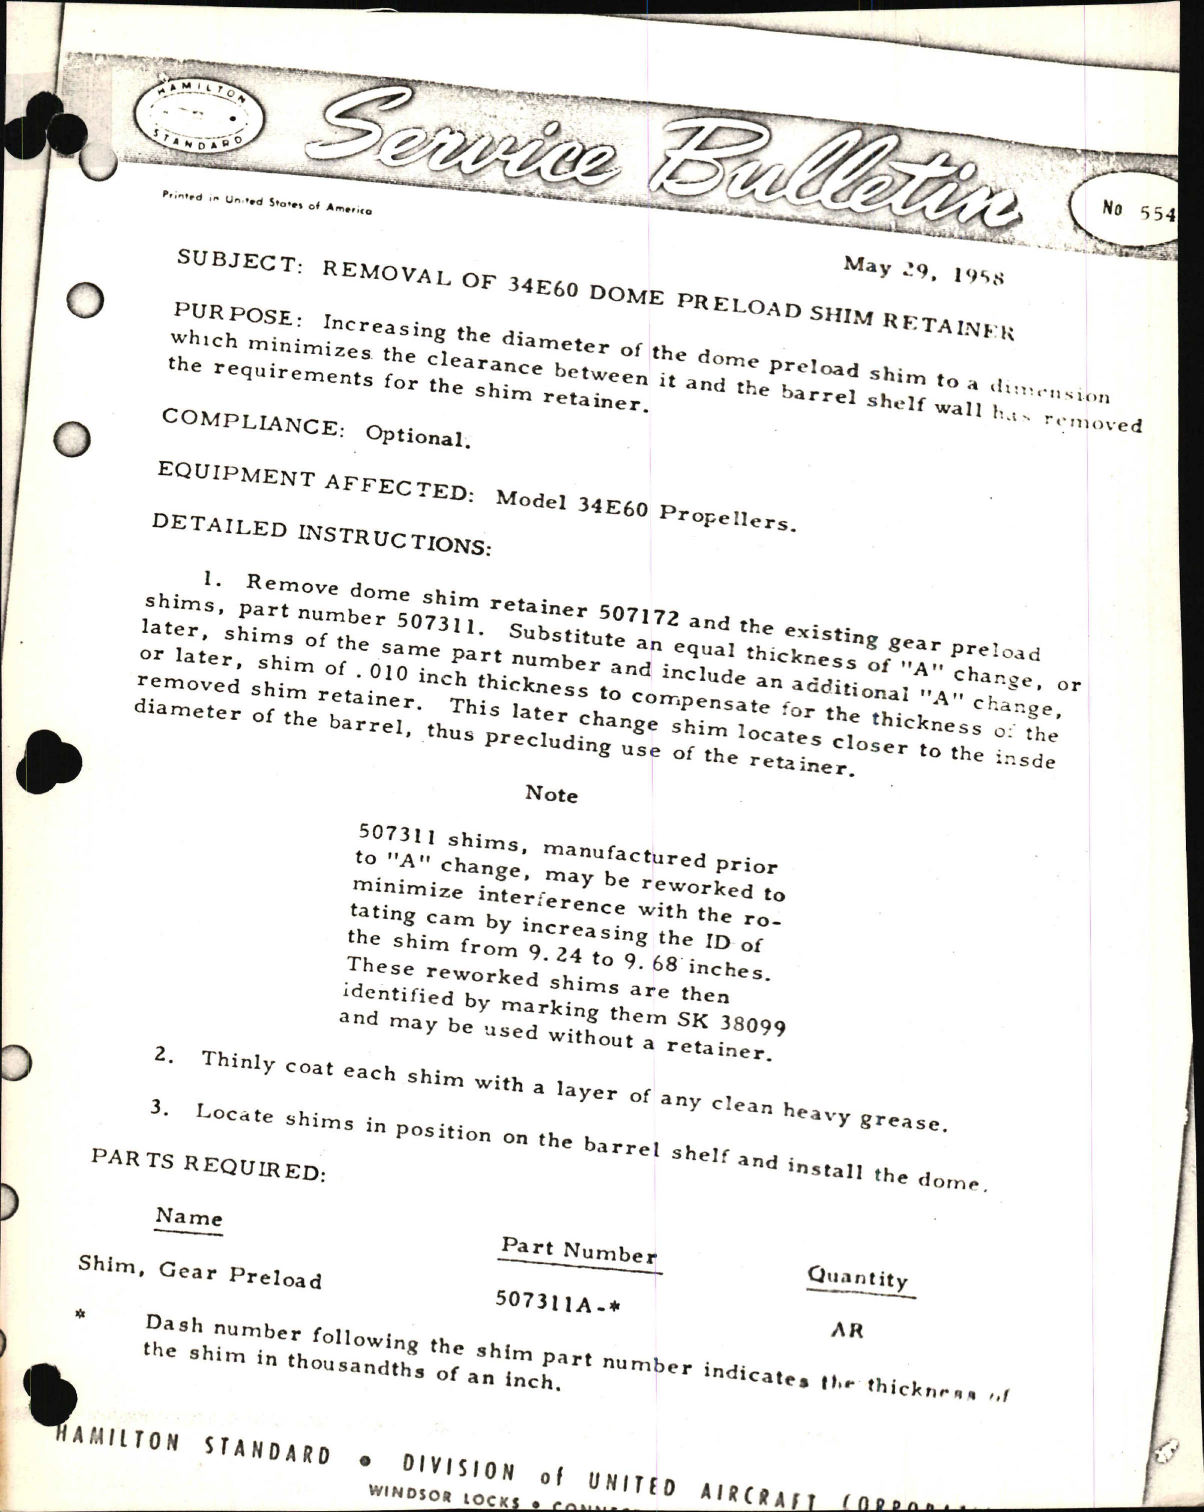 Sample page 1 from AirCorps Library document: Removal of 34E60 Dome Preload Shim Retainer